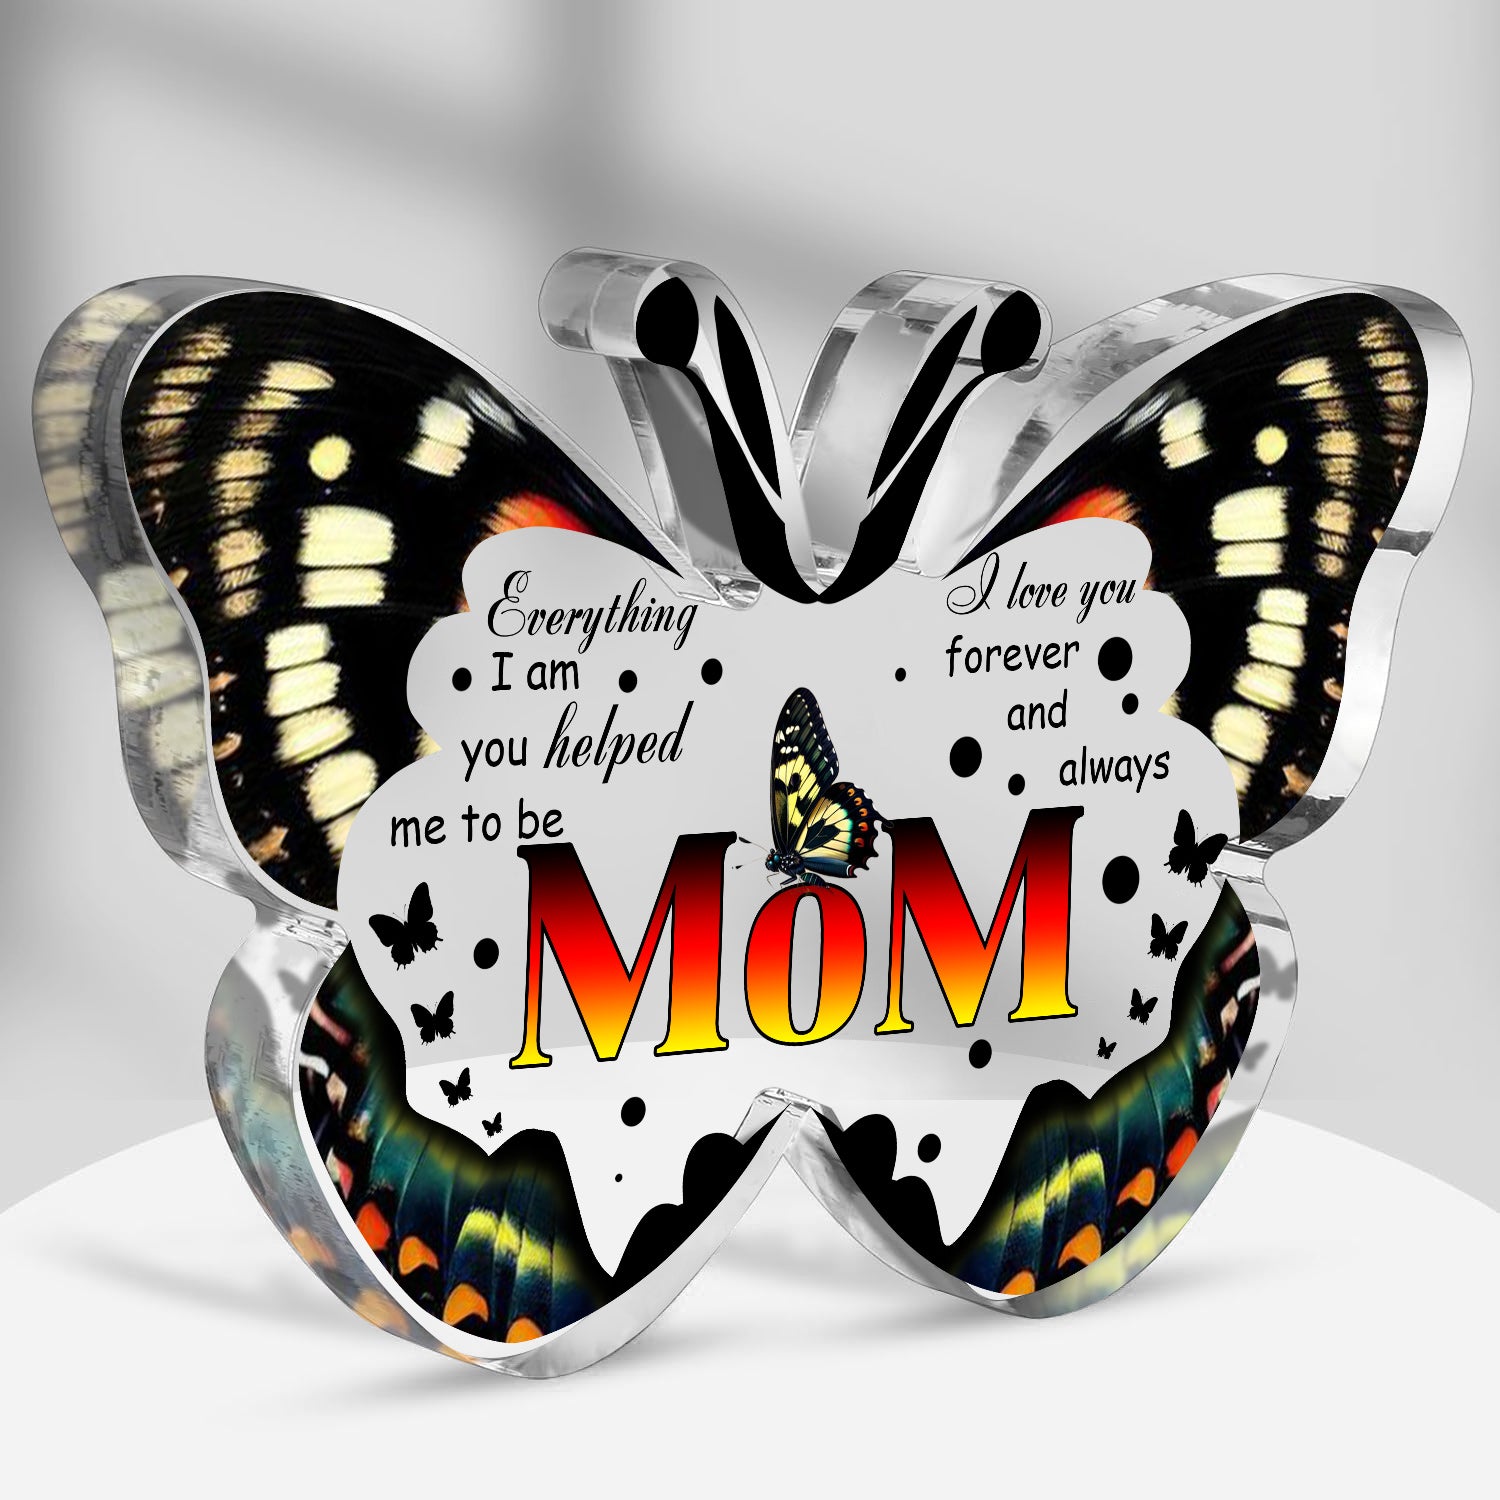 I Love You Mom Mothers Day Gifts for Mom, Unique Mom Birthday Gift Ideas, Butterfly-Shaped Acrylic Keepsake Gifts